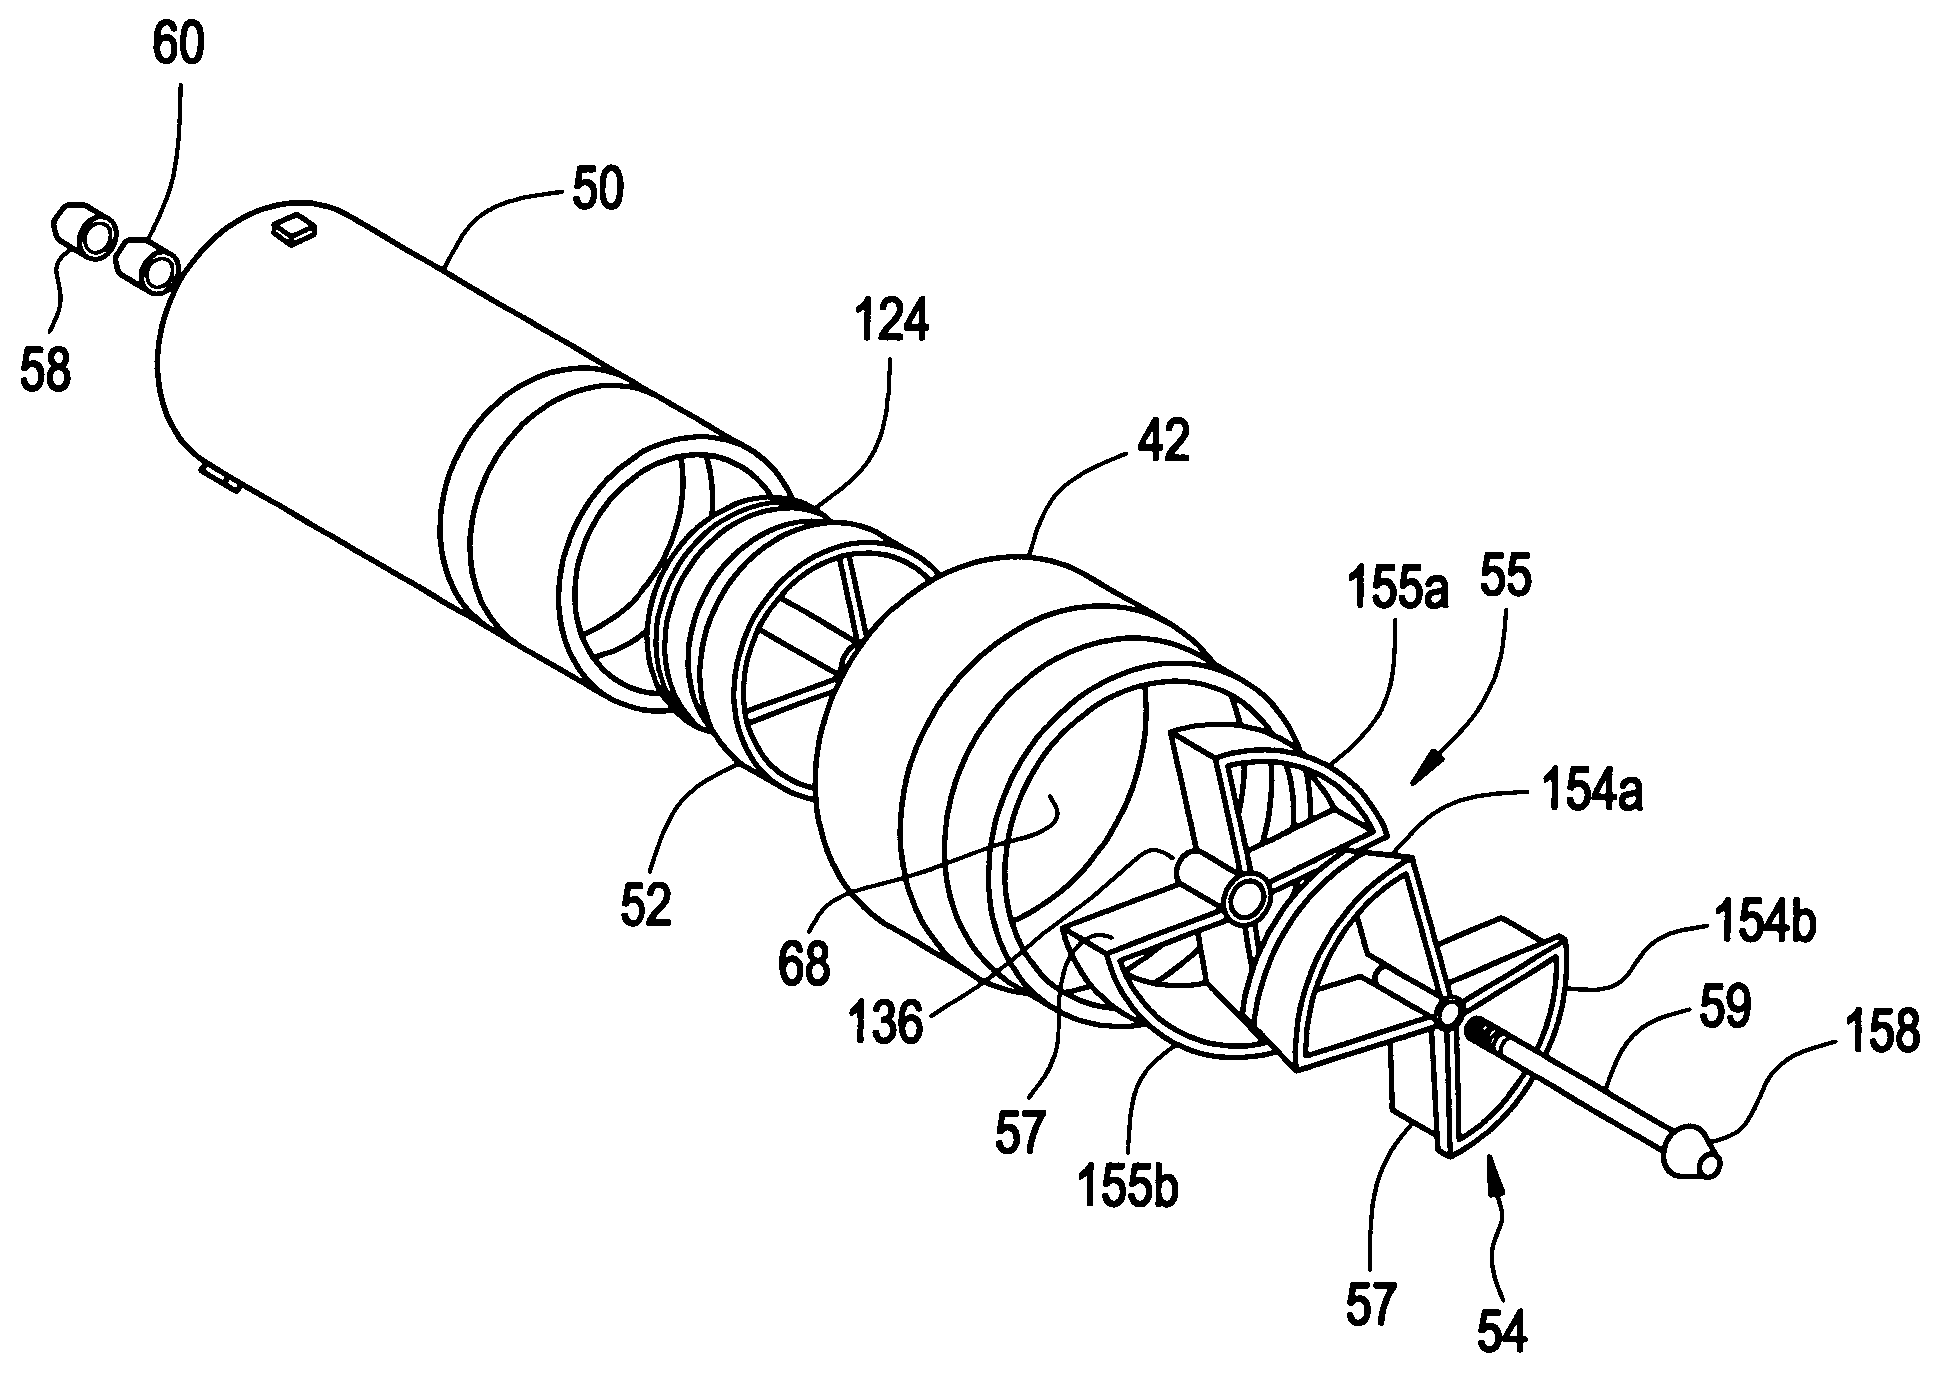 Core spray apparatus and method for installing the same